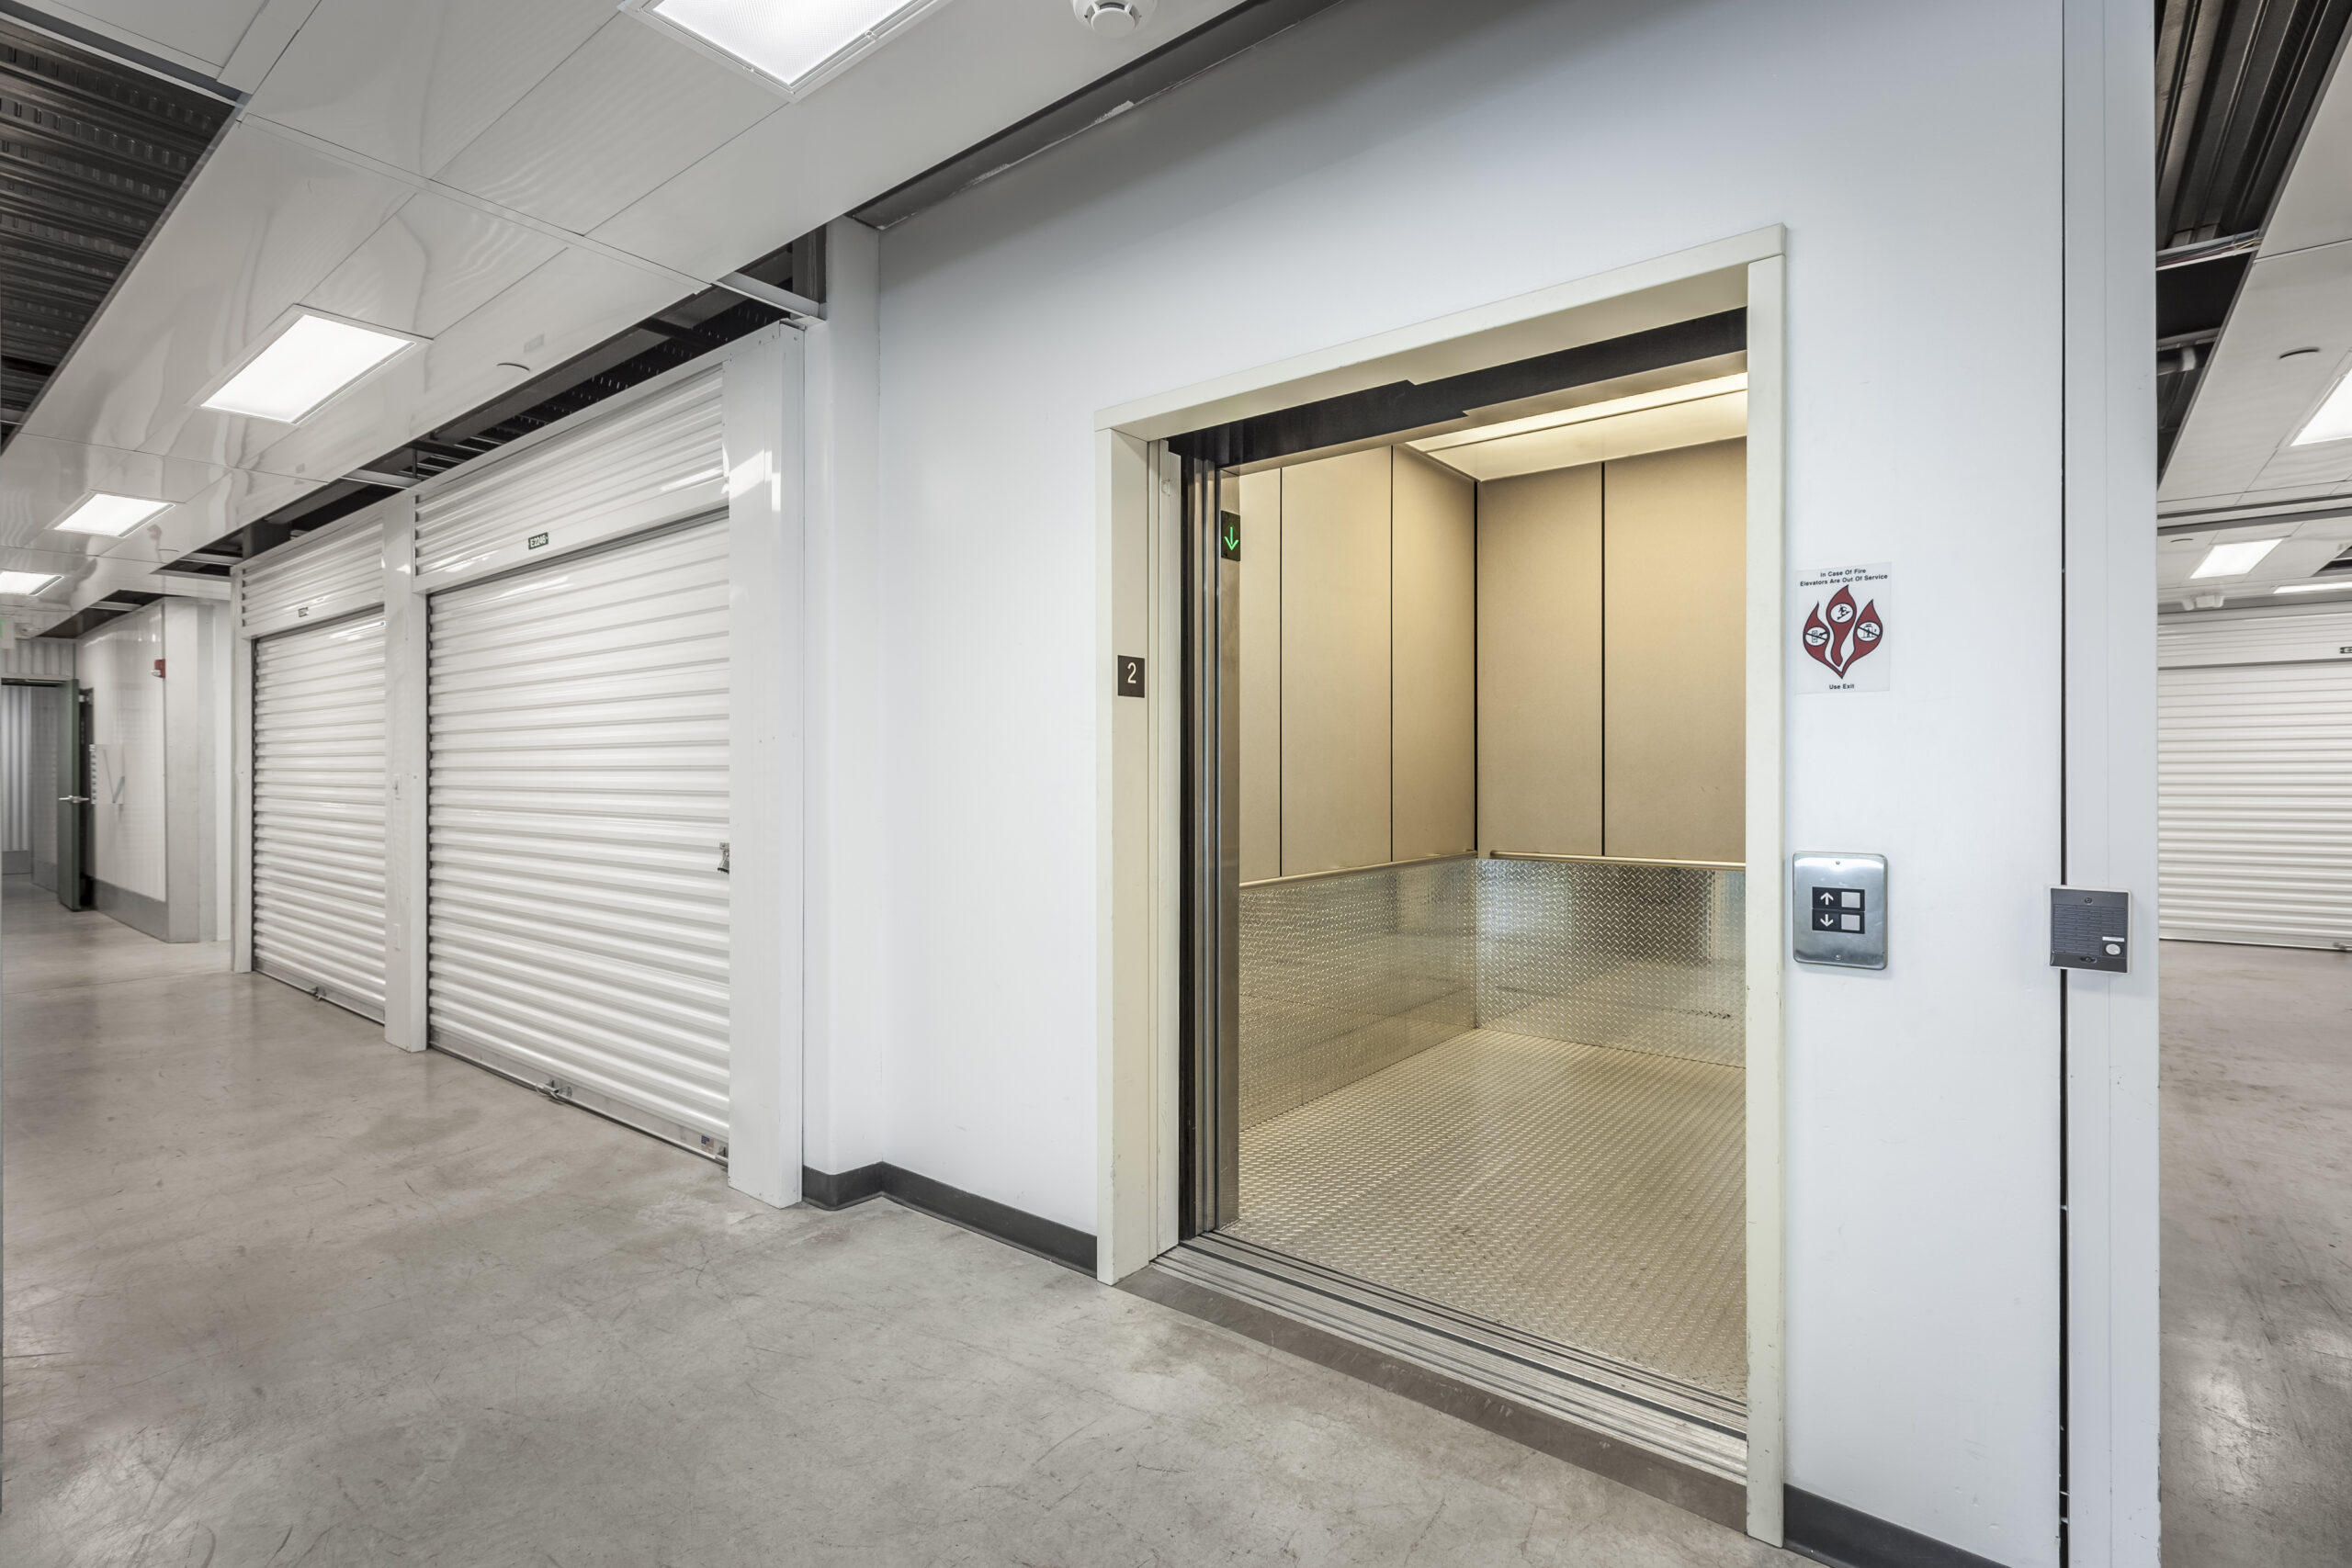 Elevator inside of a climate controlled self storage facility.